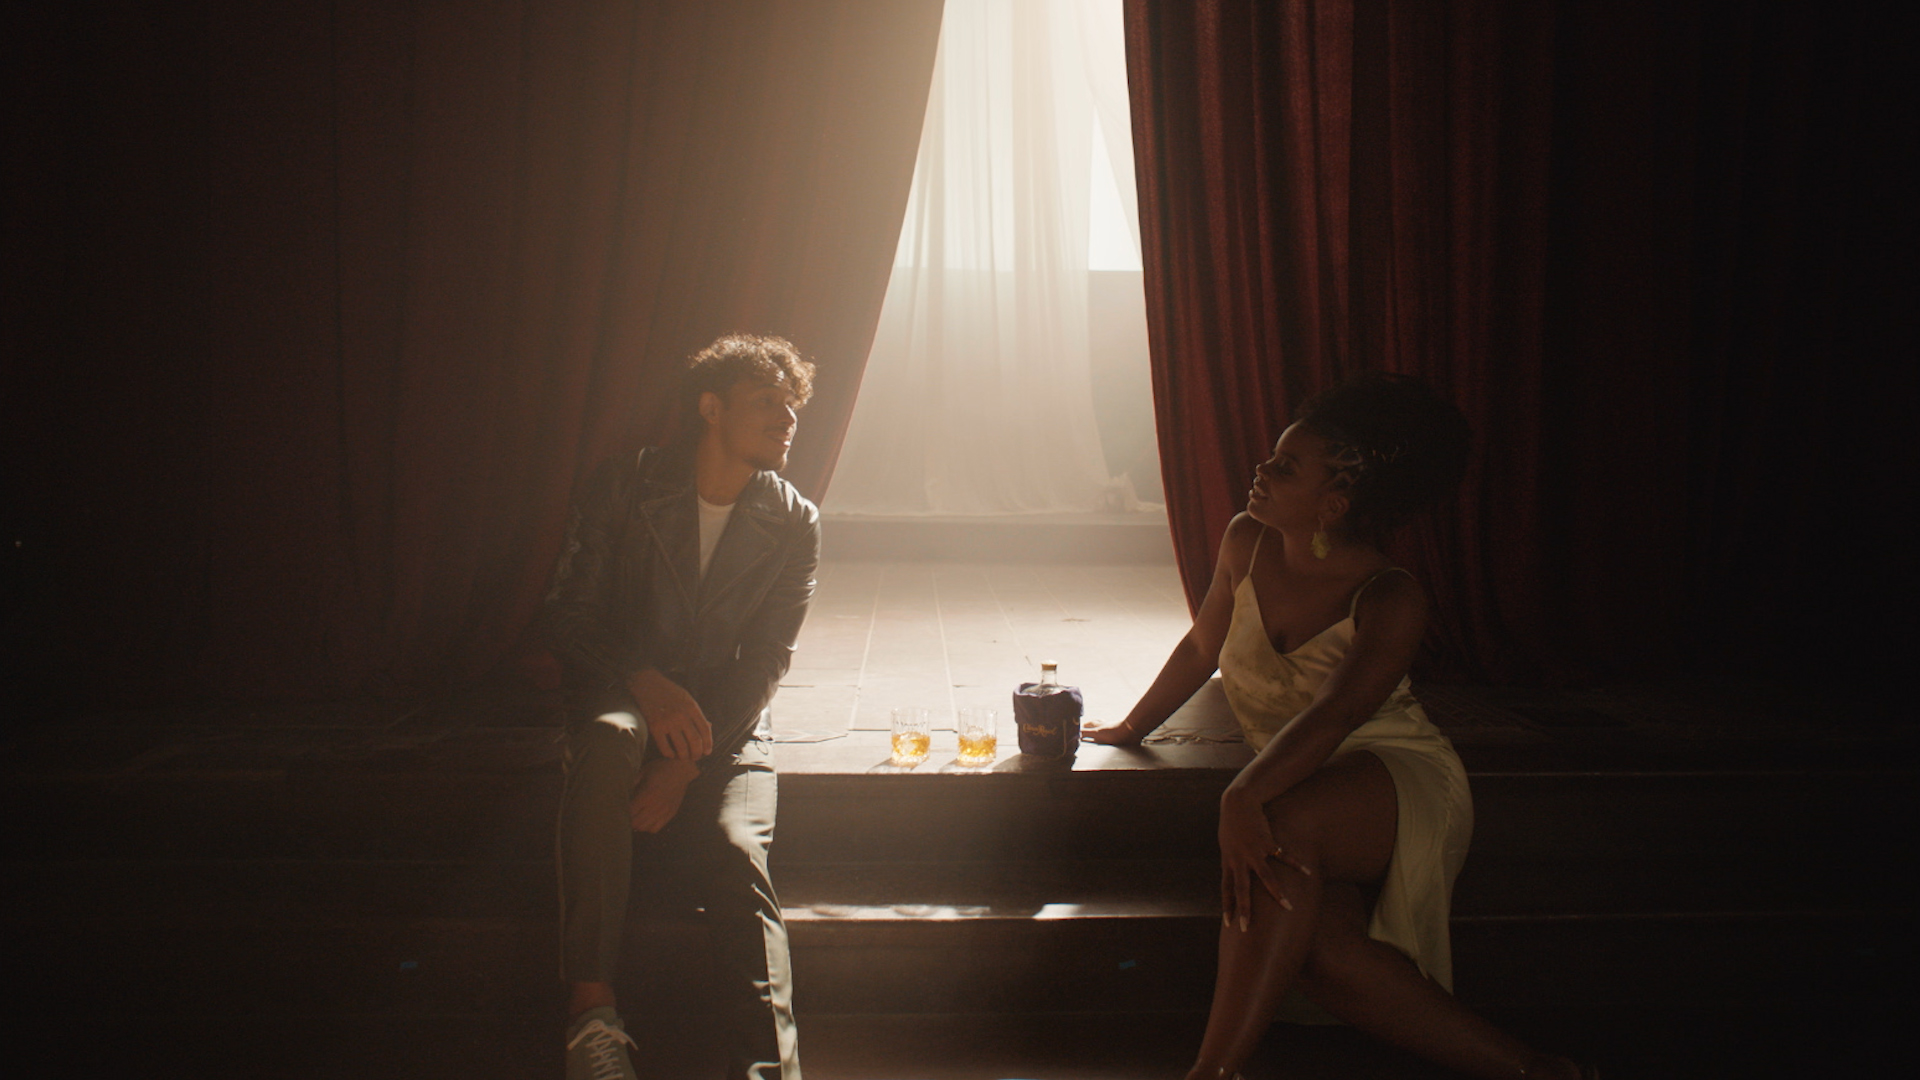 Crown Royal teamed up with renowned artists Ari Lennox and Anthony Ramos to reimagine the iconic song, “If You Want Me To Stay” where for every stream of the track, Crown Royal will donate funds to Main Street Alliance to help support venues across America.